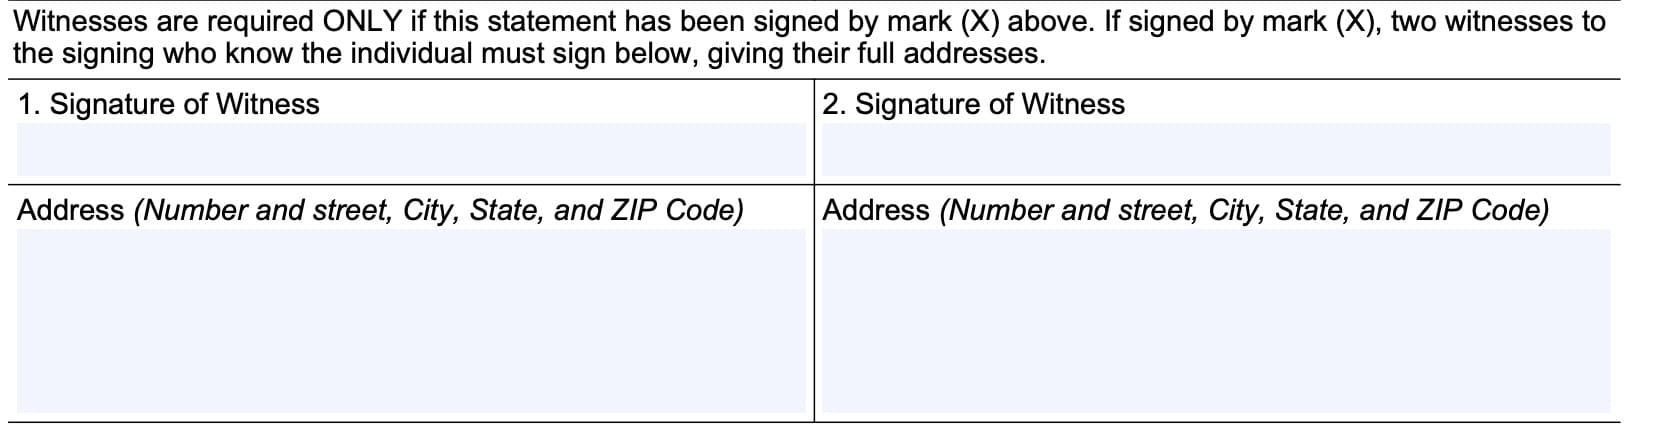 witness signature required only if applicant signs with a mark instead of a signature